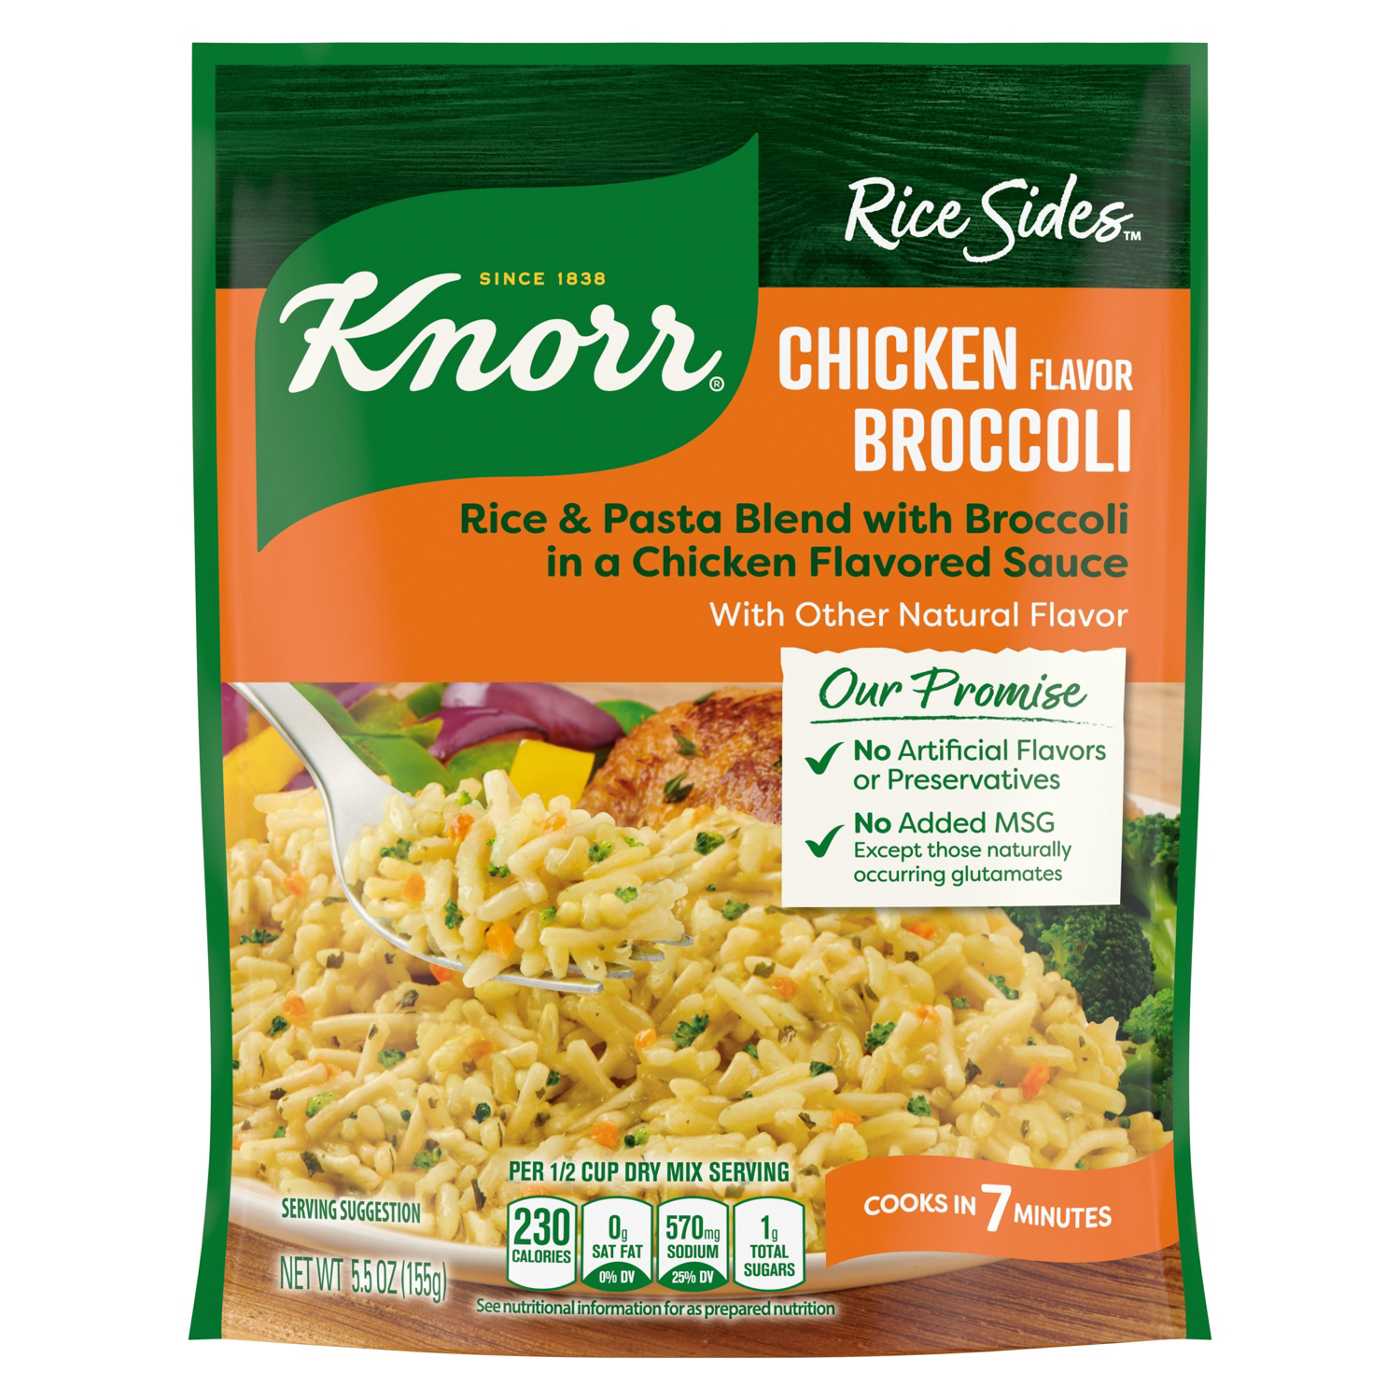 Knorr Rice Sides Chicken Broccoli with Long Grain Rice and Vermicelli Pasta; image 1 of 5